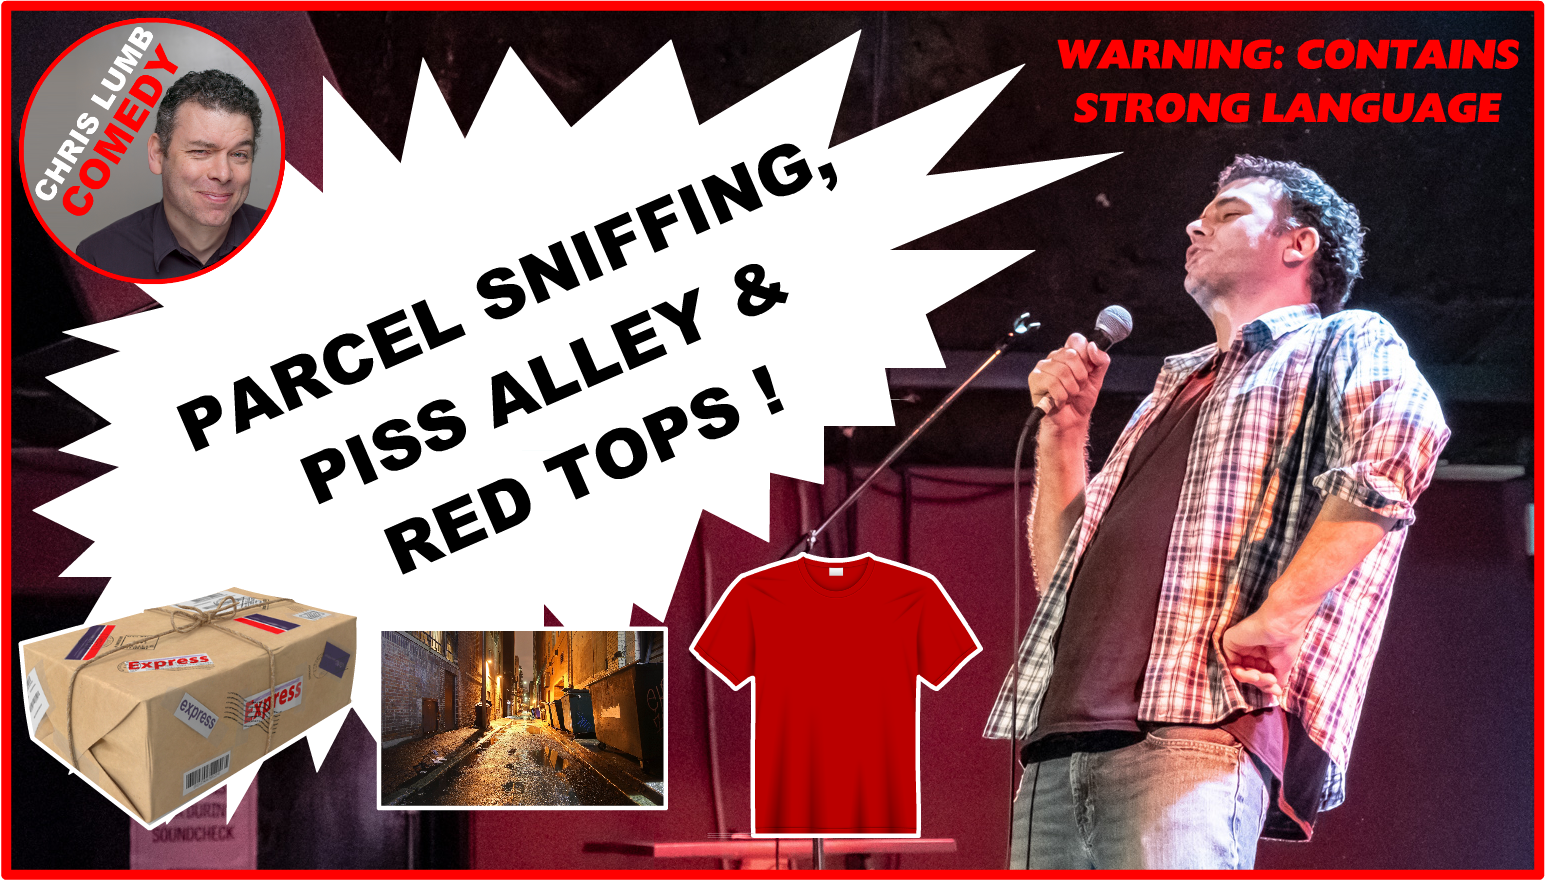 Chris Lumb Comedy "Parcel Sniffing, Piss Alley & Red Tops"